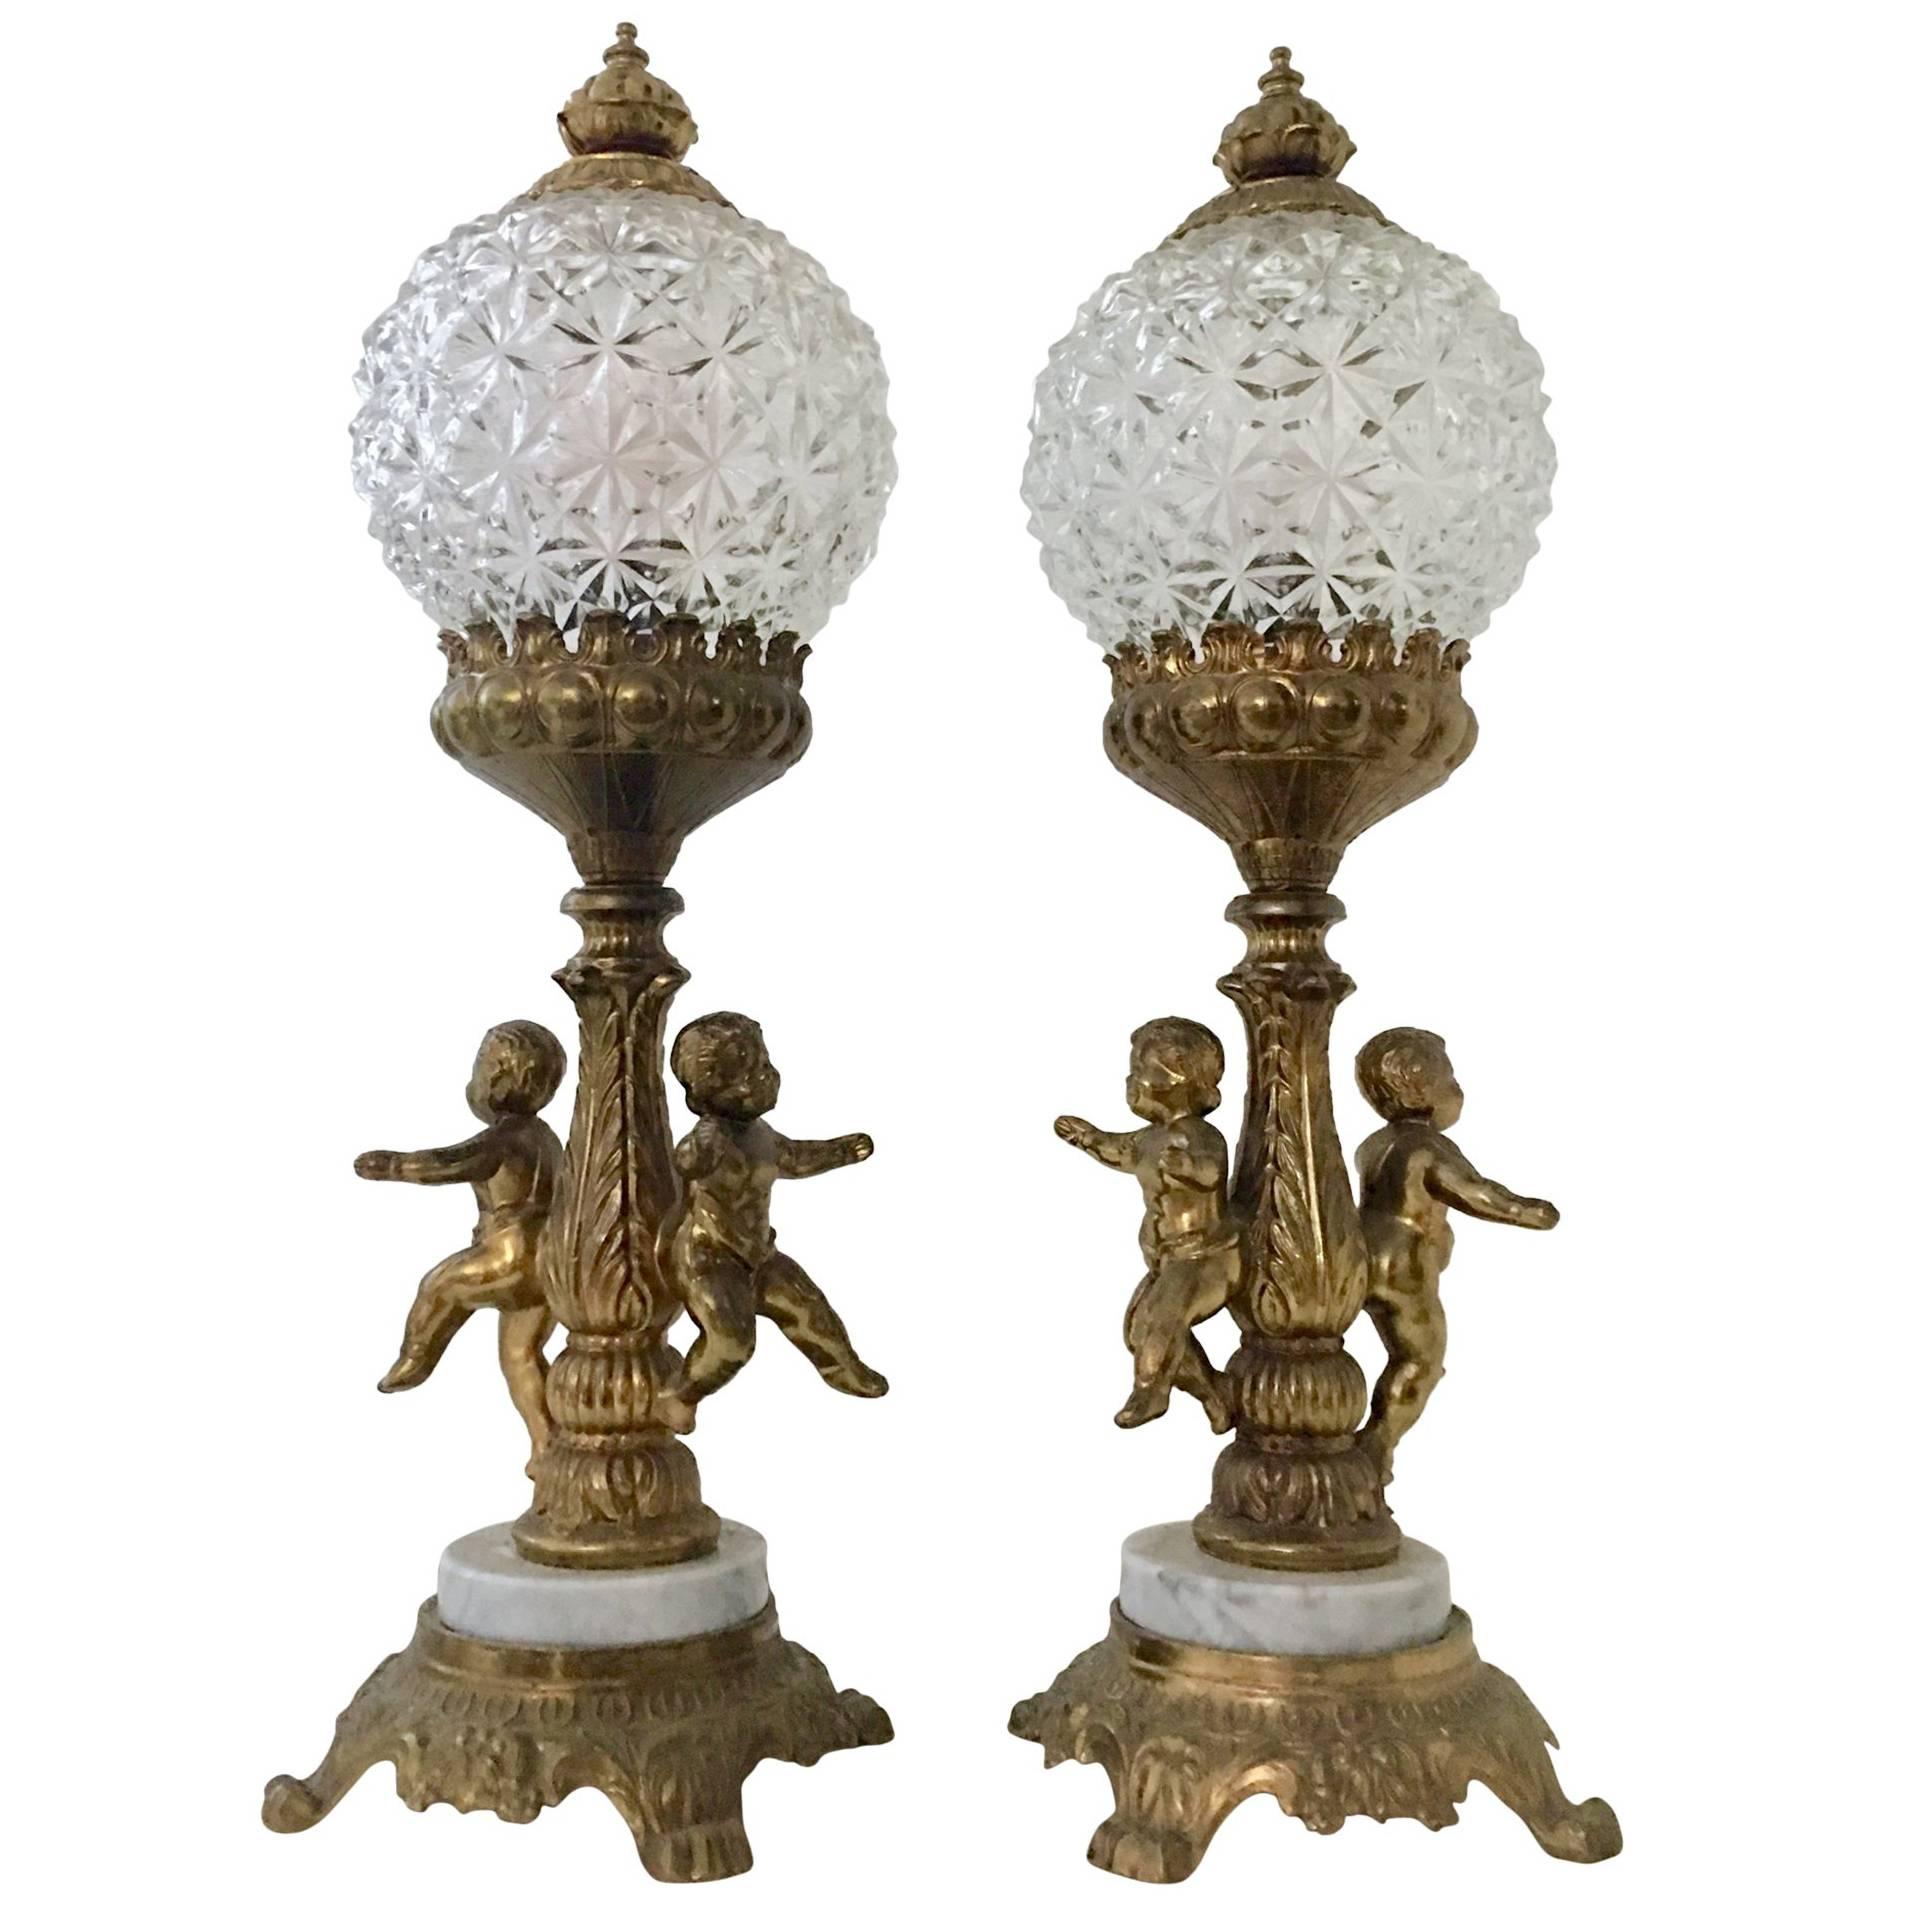 Pair of French Style Bronze Ormolu and Marble Putti Electrified Oil Lamps